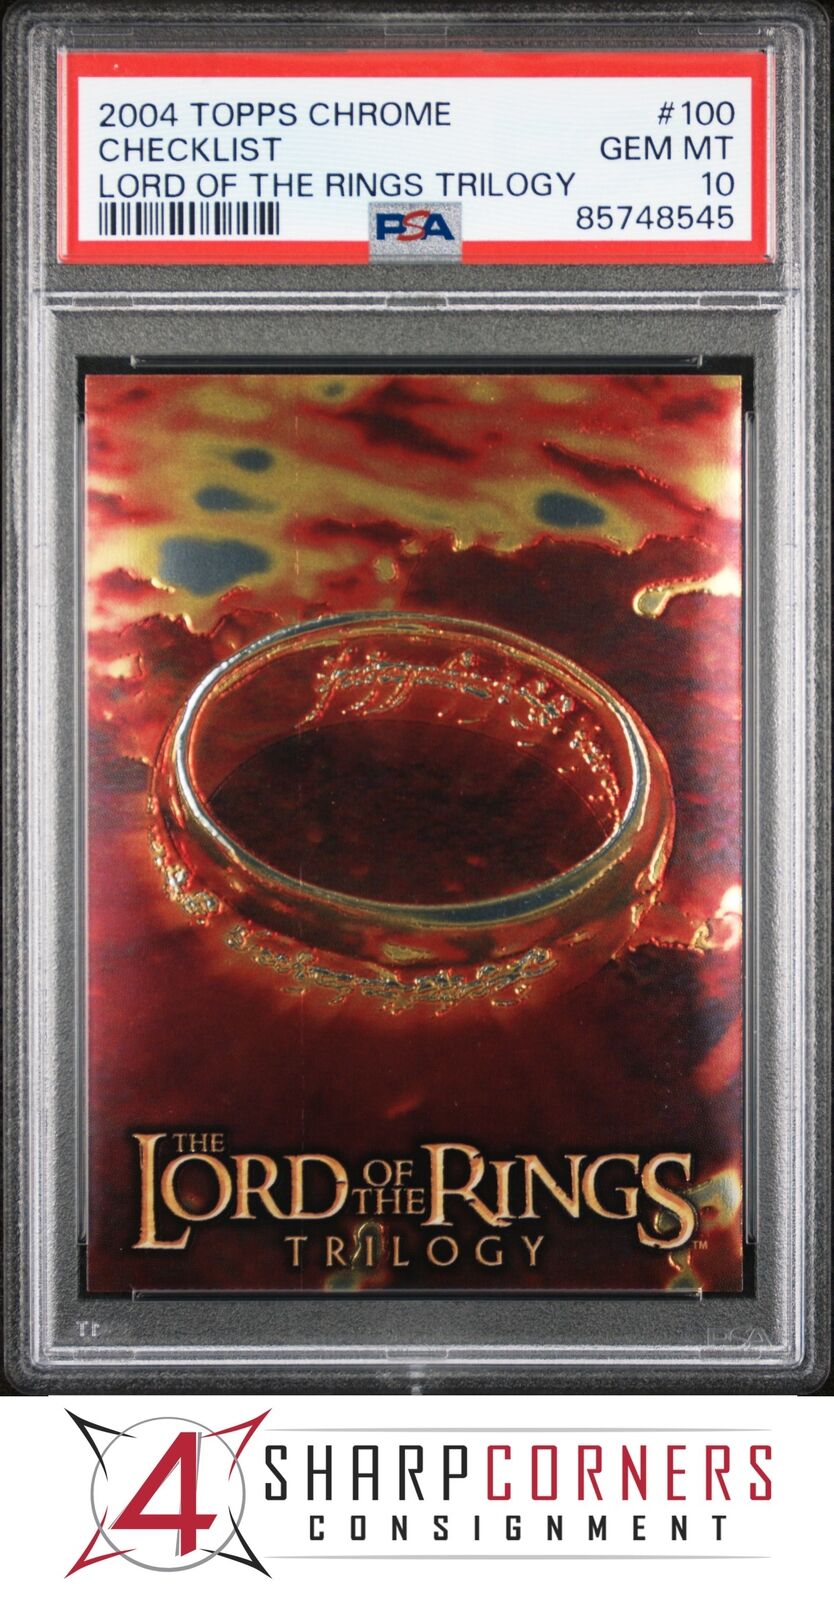 2004 TOPPS CHROME LORD OF THE RINGS TRILOGY #100 CHECKLIST PSA 10 N3920887-545